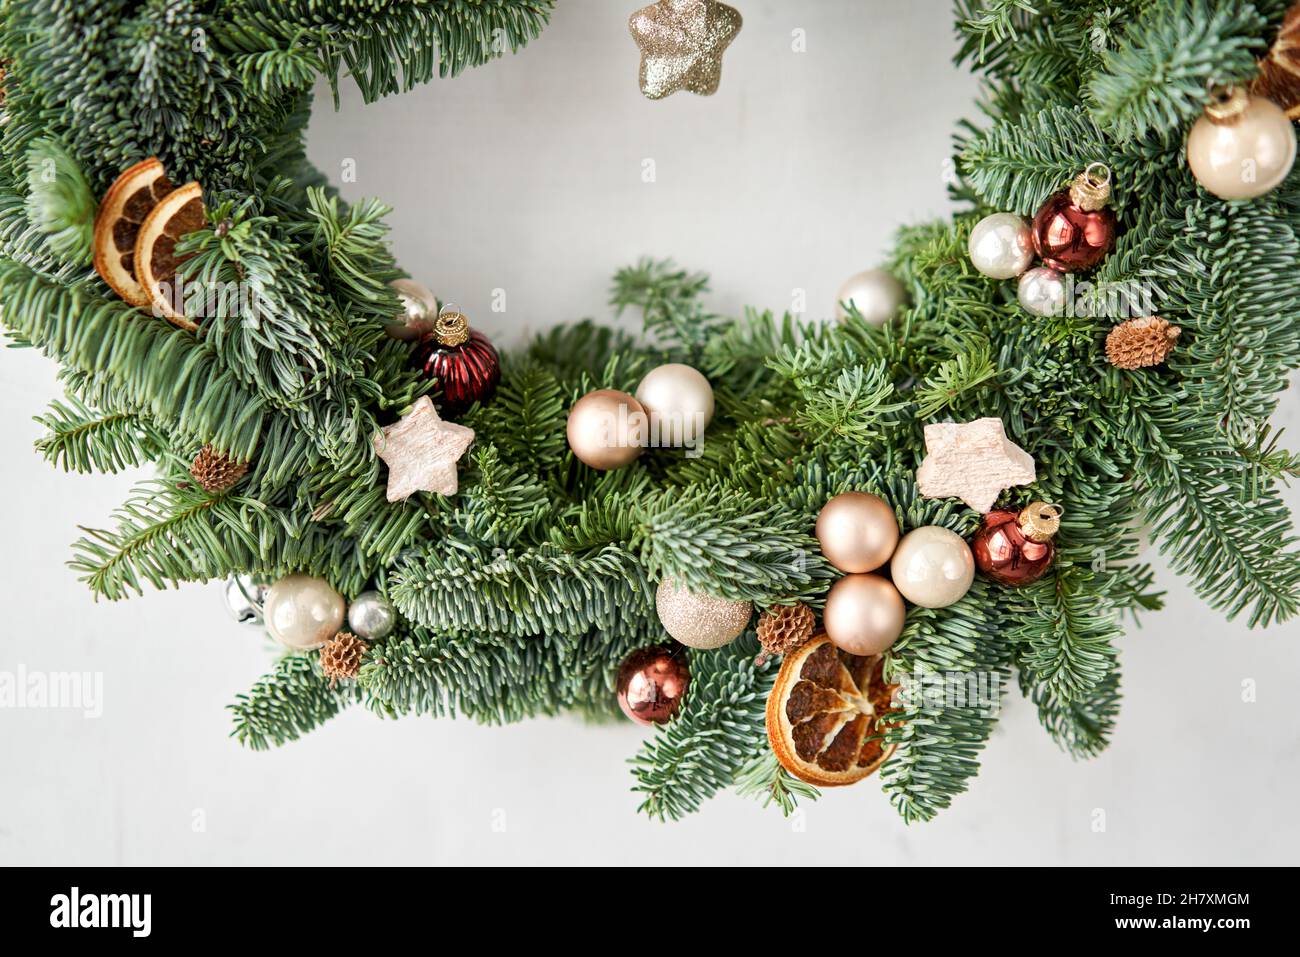 Beautiful festive wreath of fresh spruce on Gray wall. Xmas circlet with red and gold ornaments and balls. Christmas mood. Stock Photo